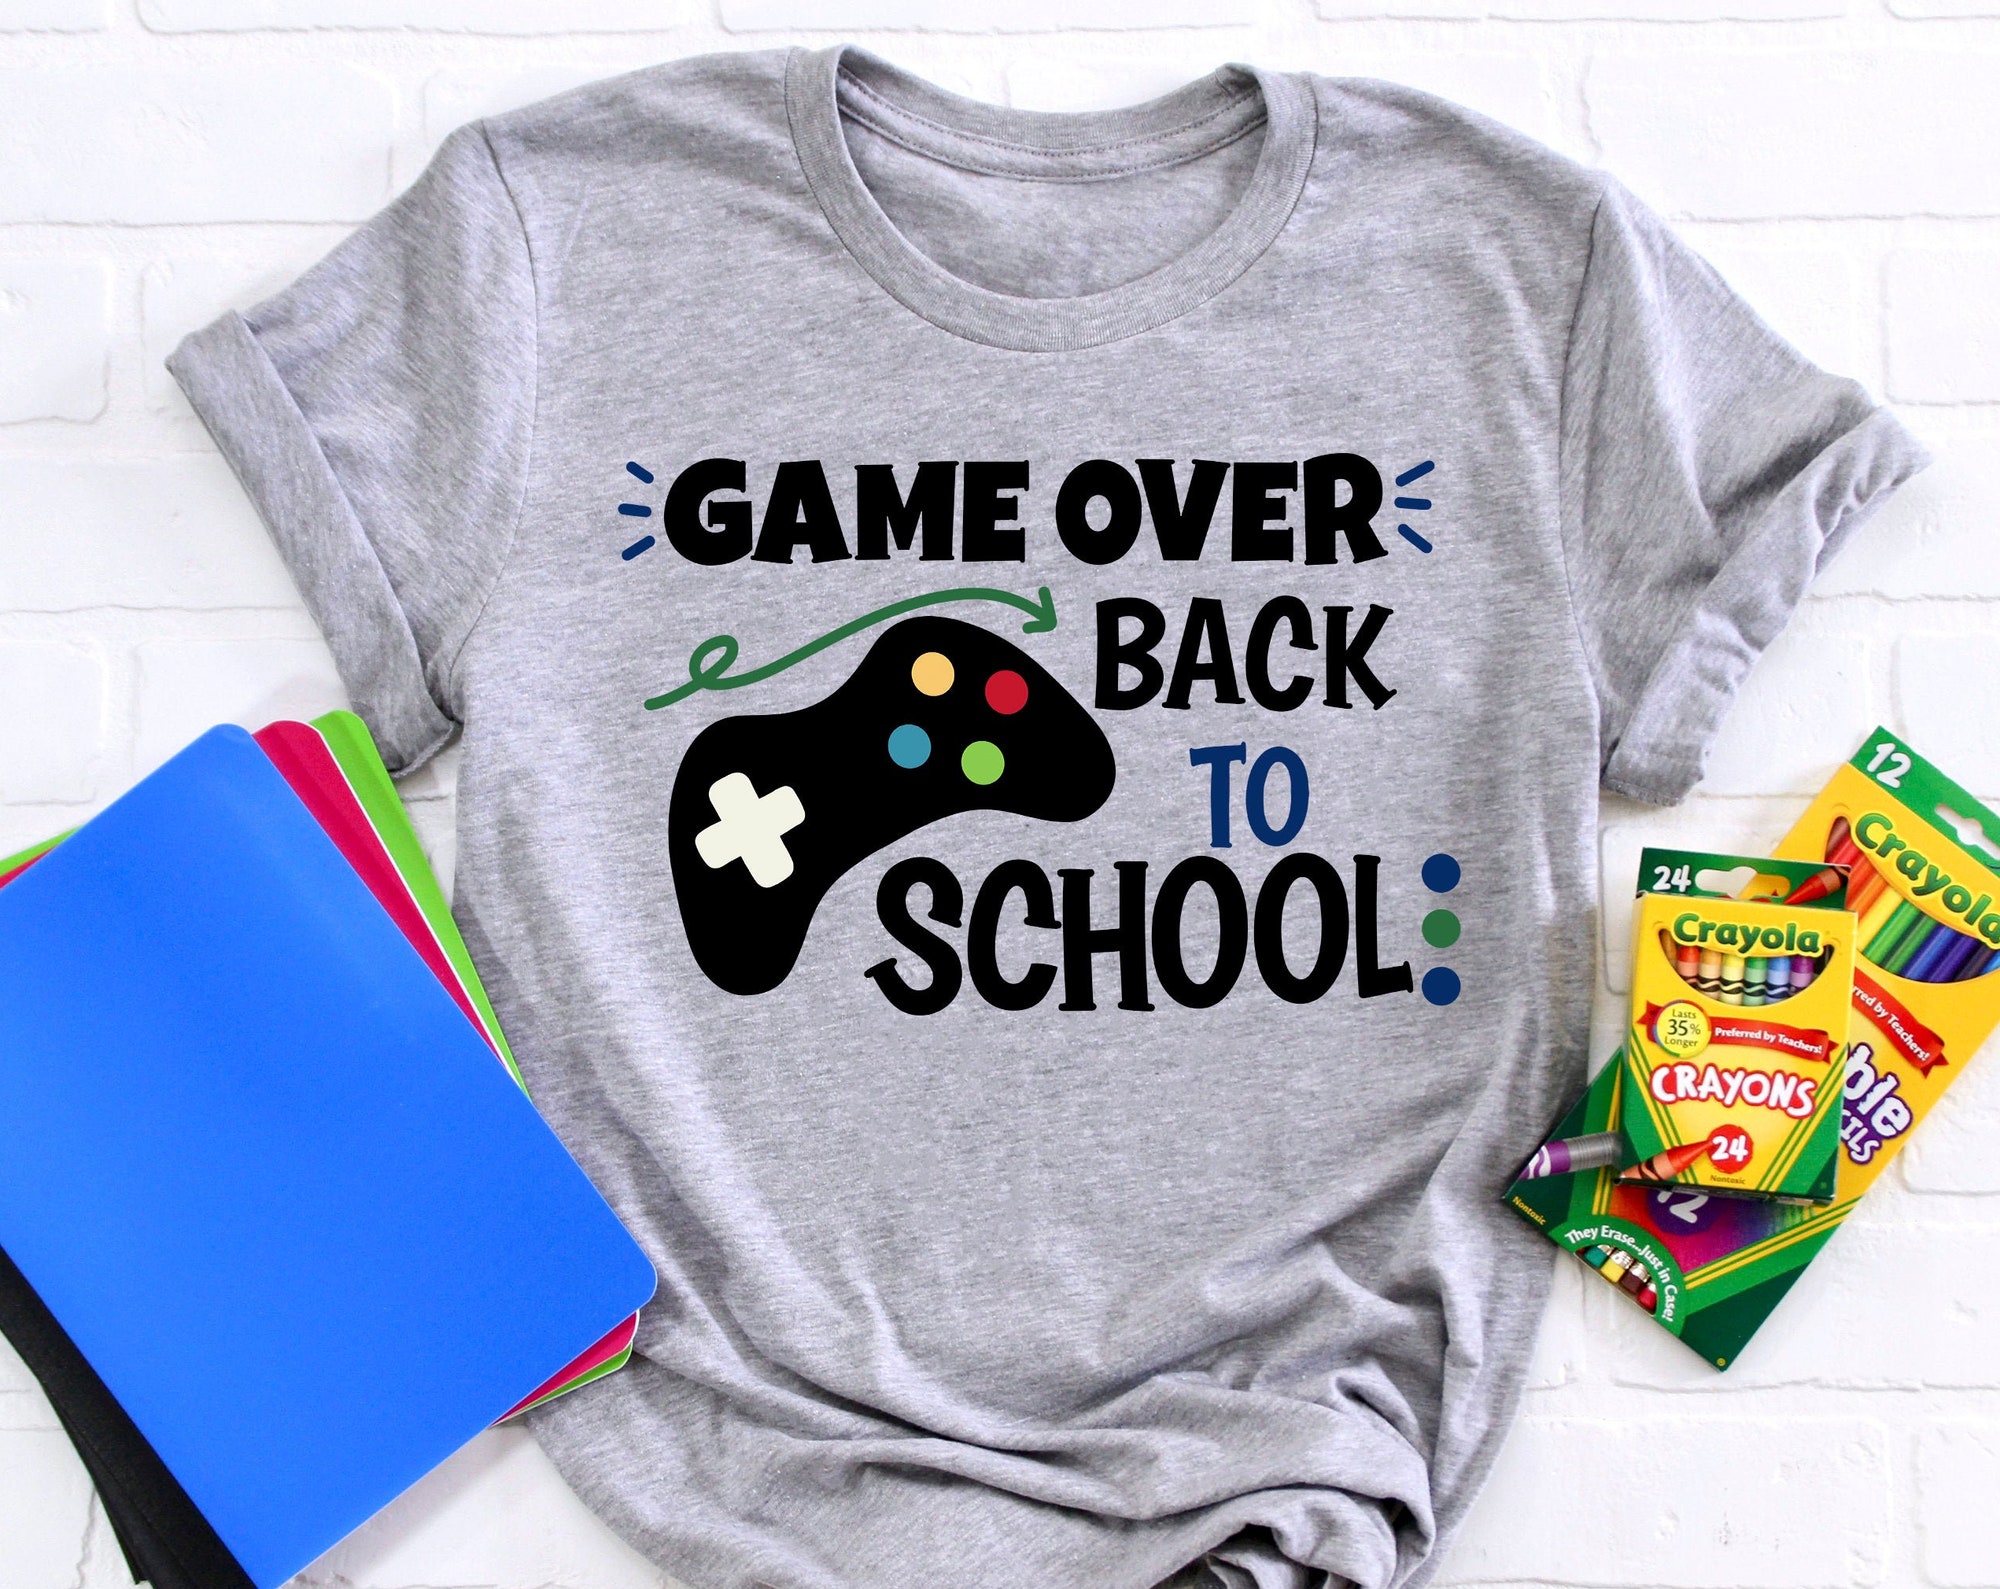 Discover Game Over Back To School Shirt, Back to School Shirt, First Day of School